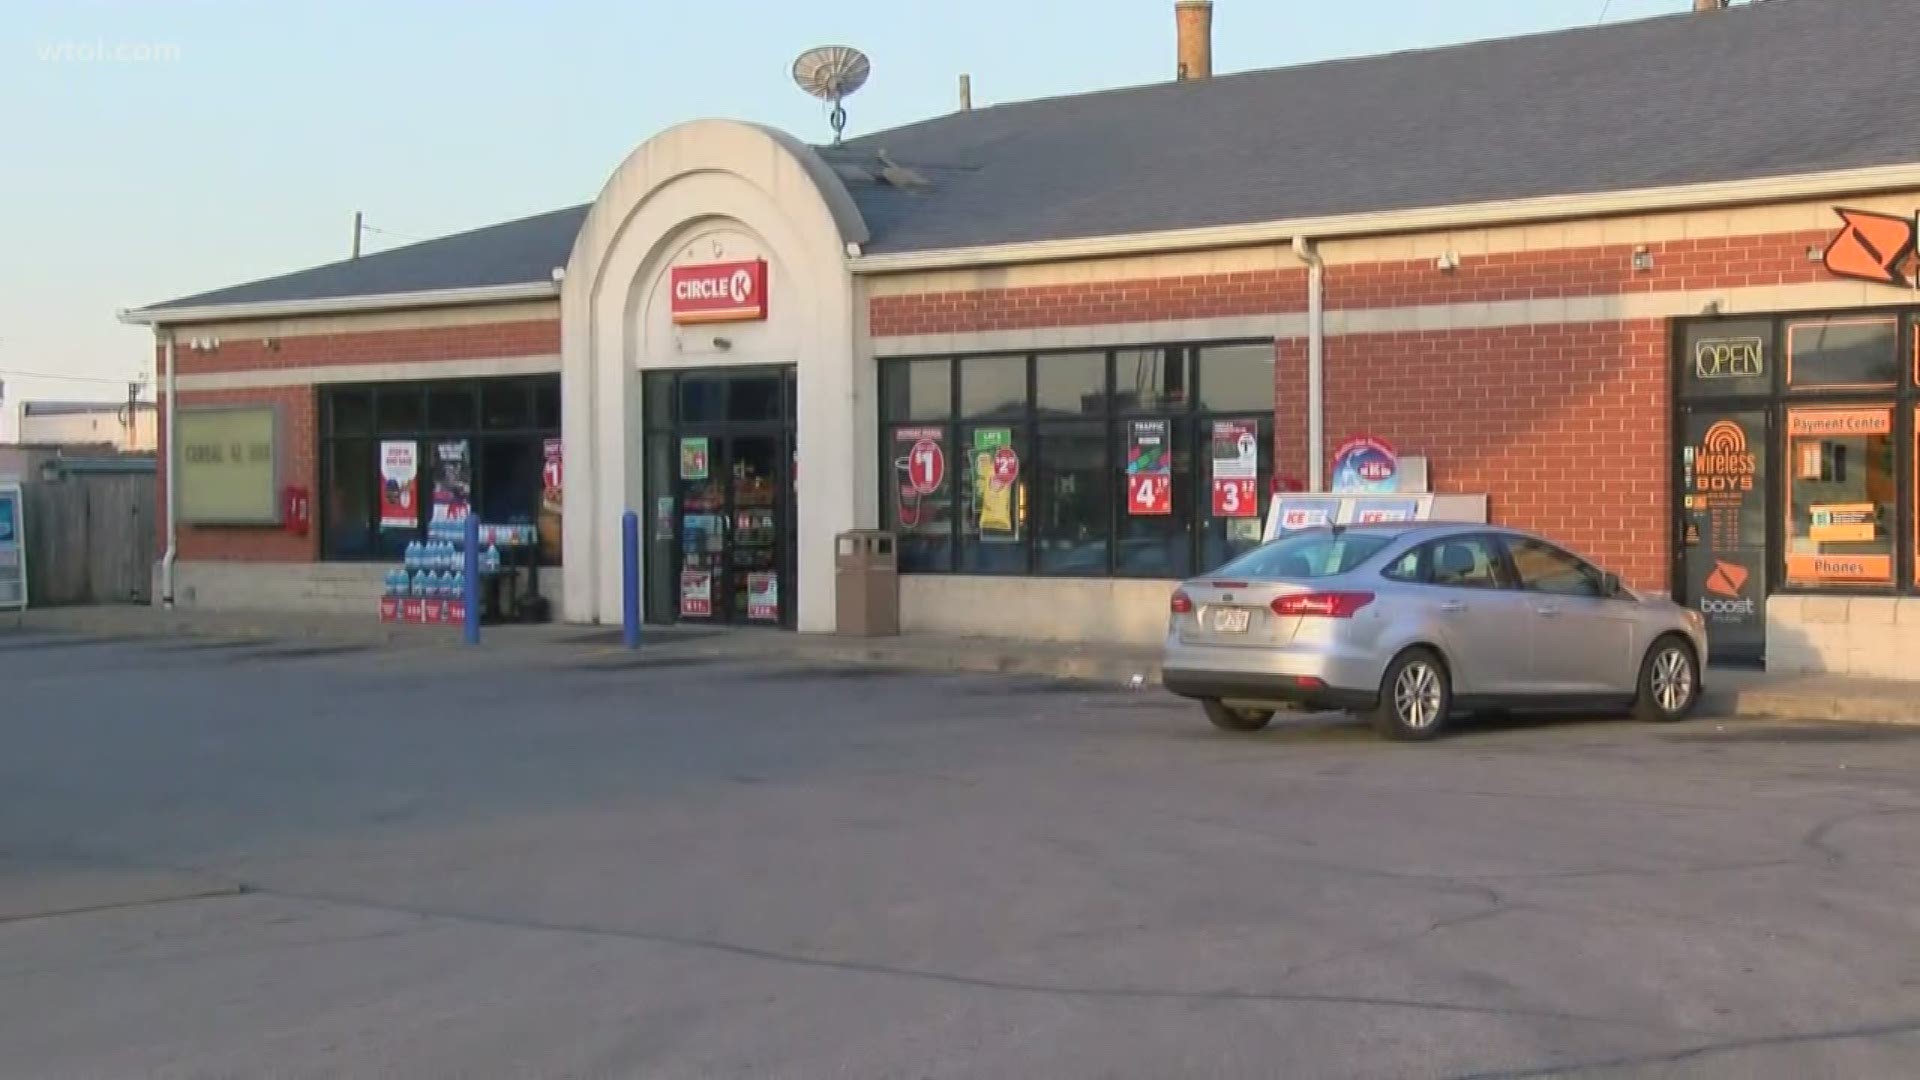 Police say the man's face was partially covered when he entered the Circle K, demanded cash and got away with an unknown amount from the register.